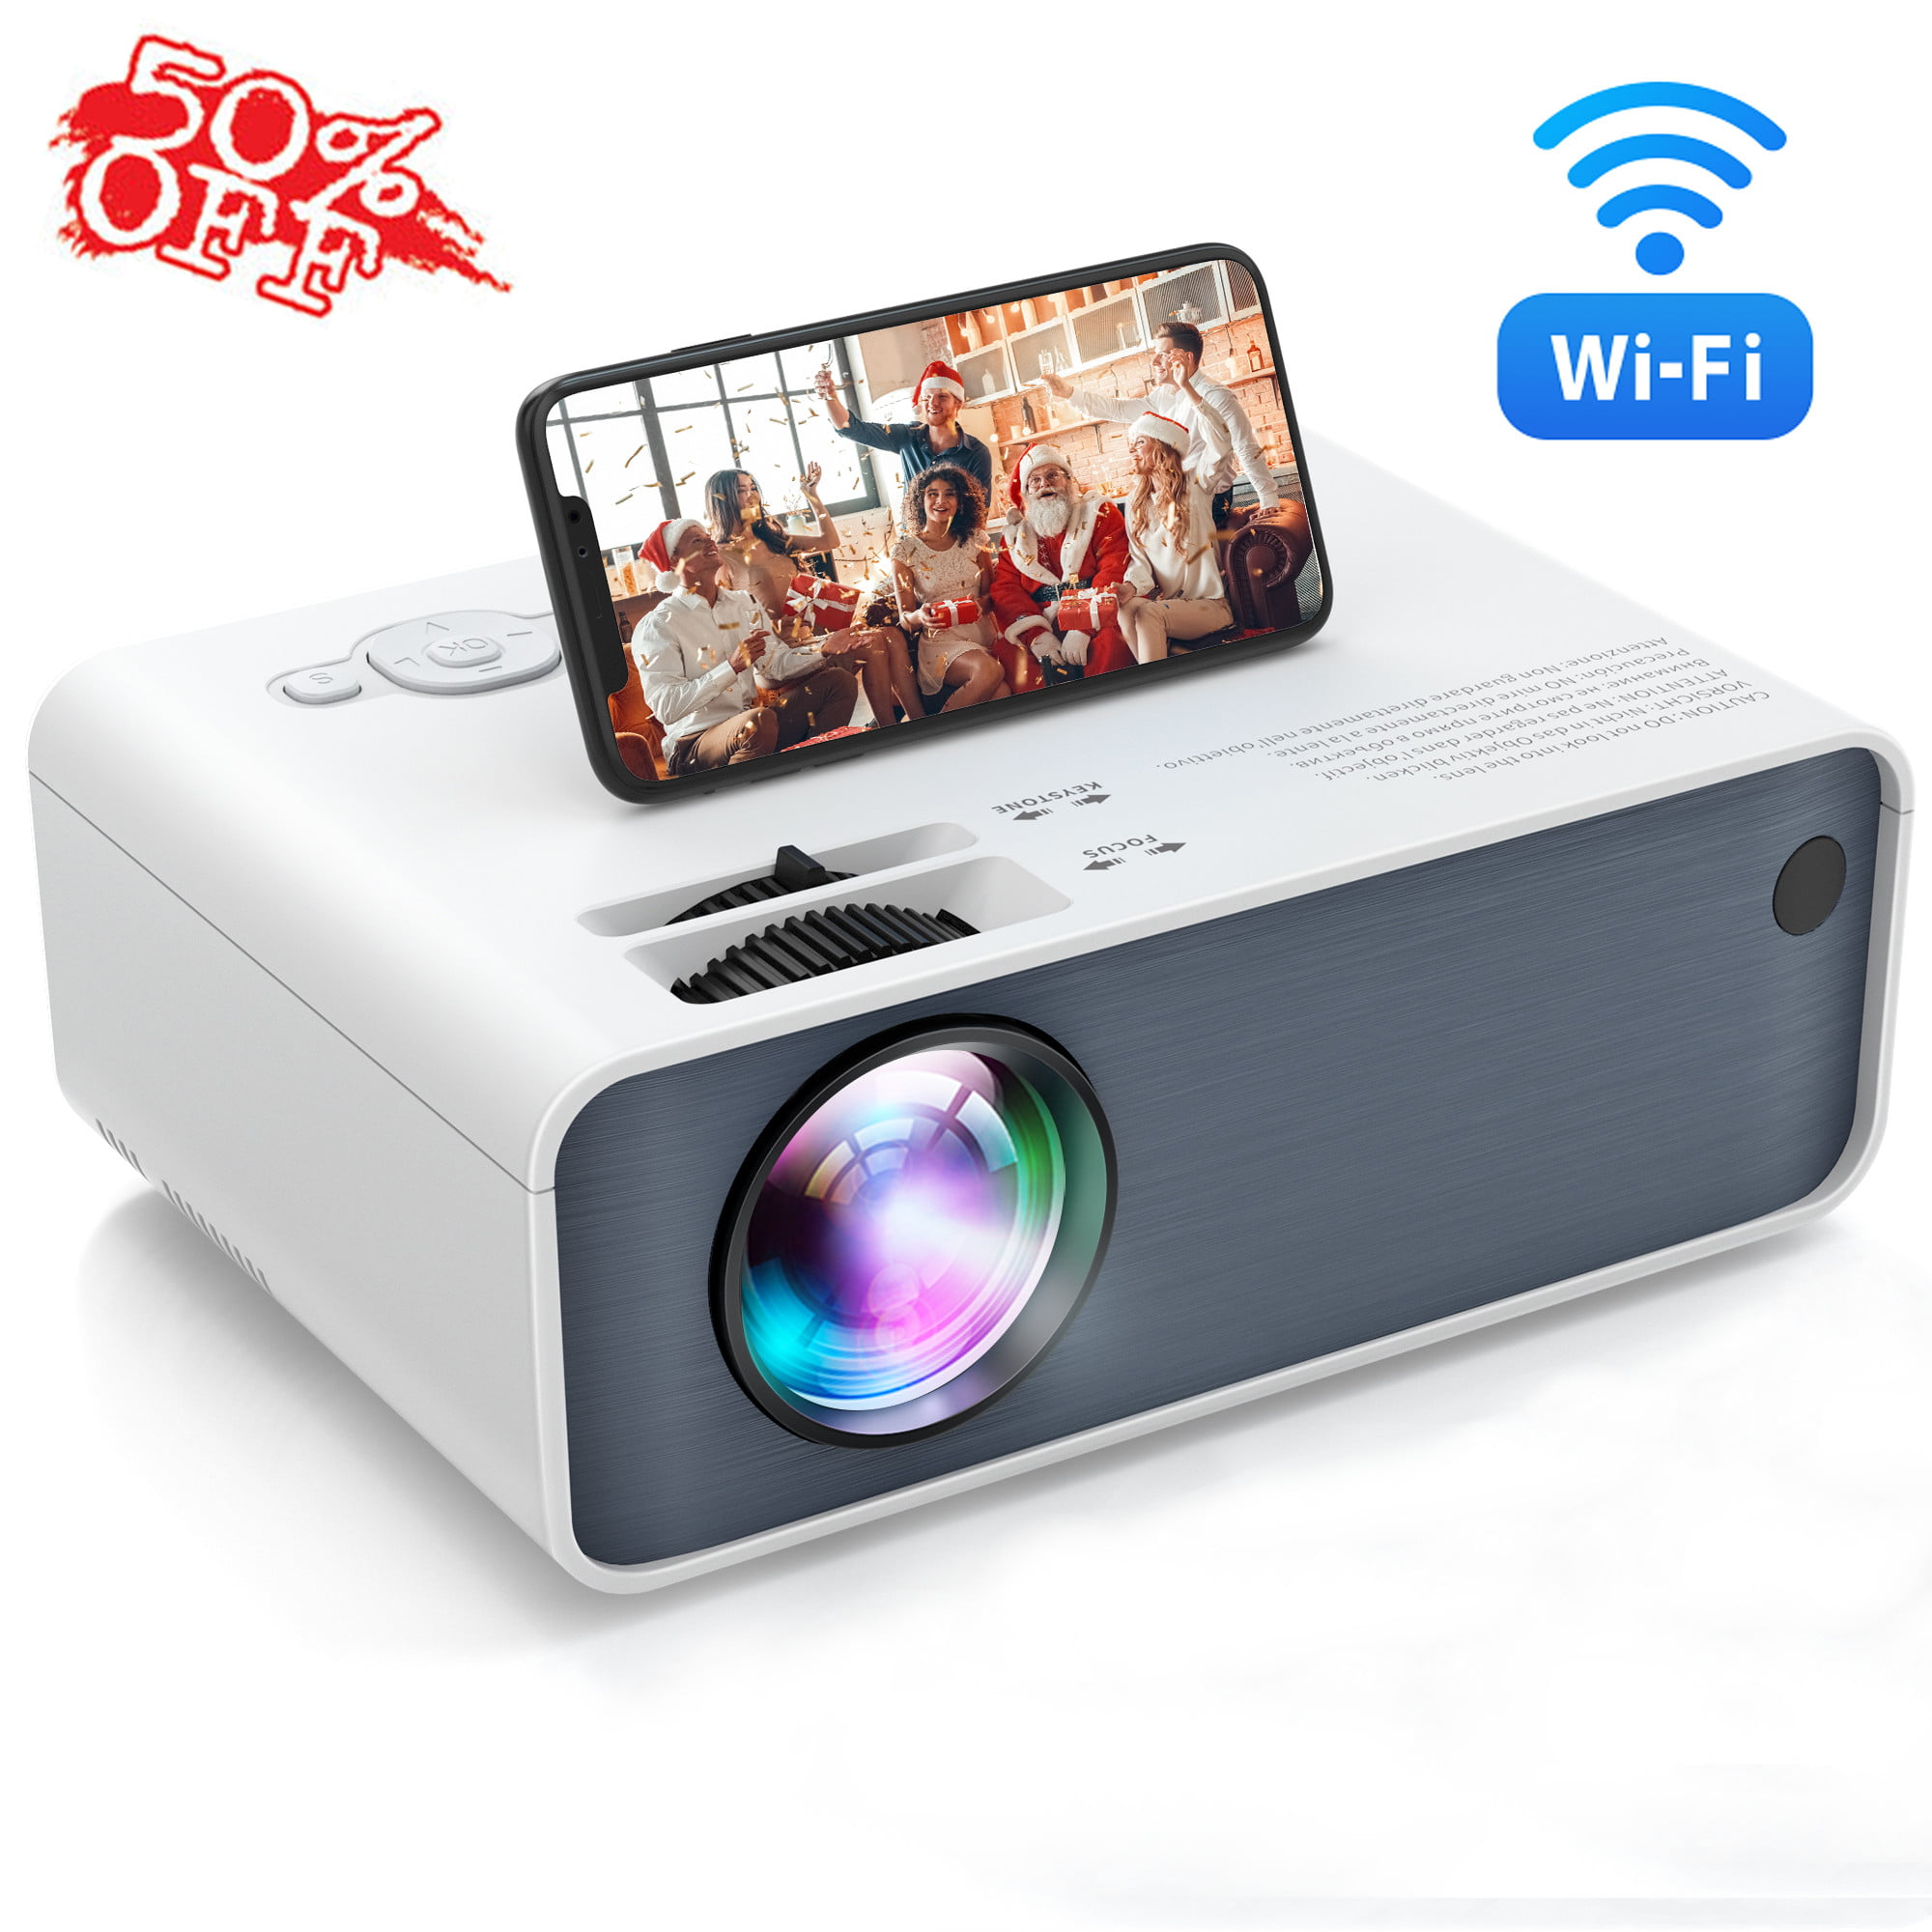 WiFi Video Projector Smart Phone Wireless Mirroing Screen 9500L HD Outdoor Portable Home Movie Projector Laptop Support TV Stick USB 200 HDMI DVD LED Cinop Native 1080P 4K Supported 